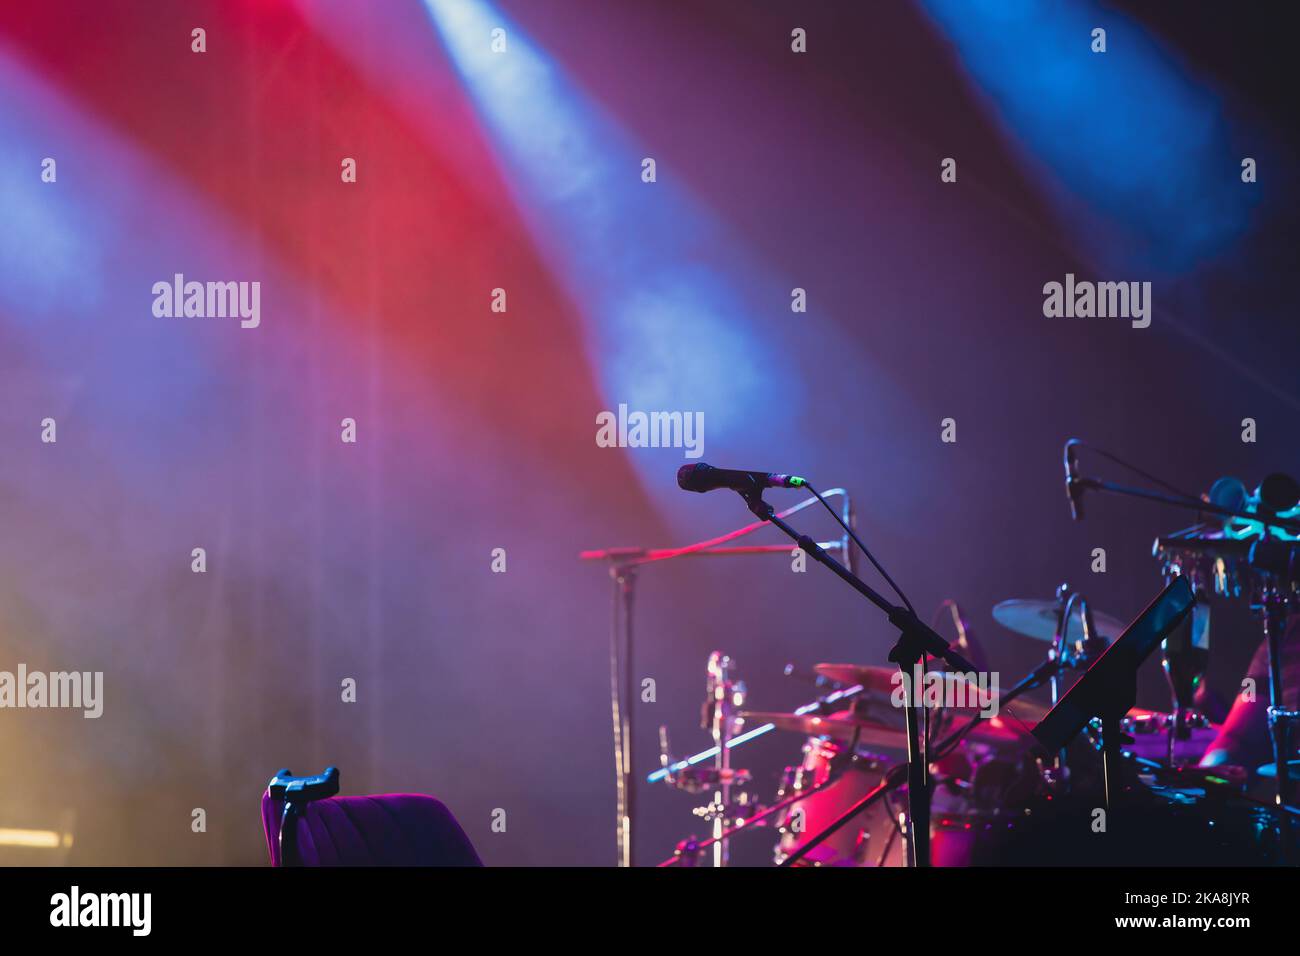 Microphone in colored spotlights and smoke. Concert and theatre scene Stock Photo